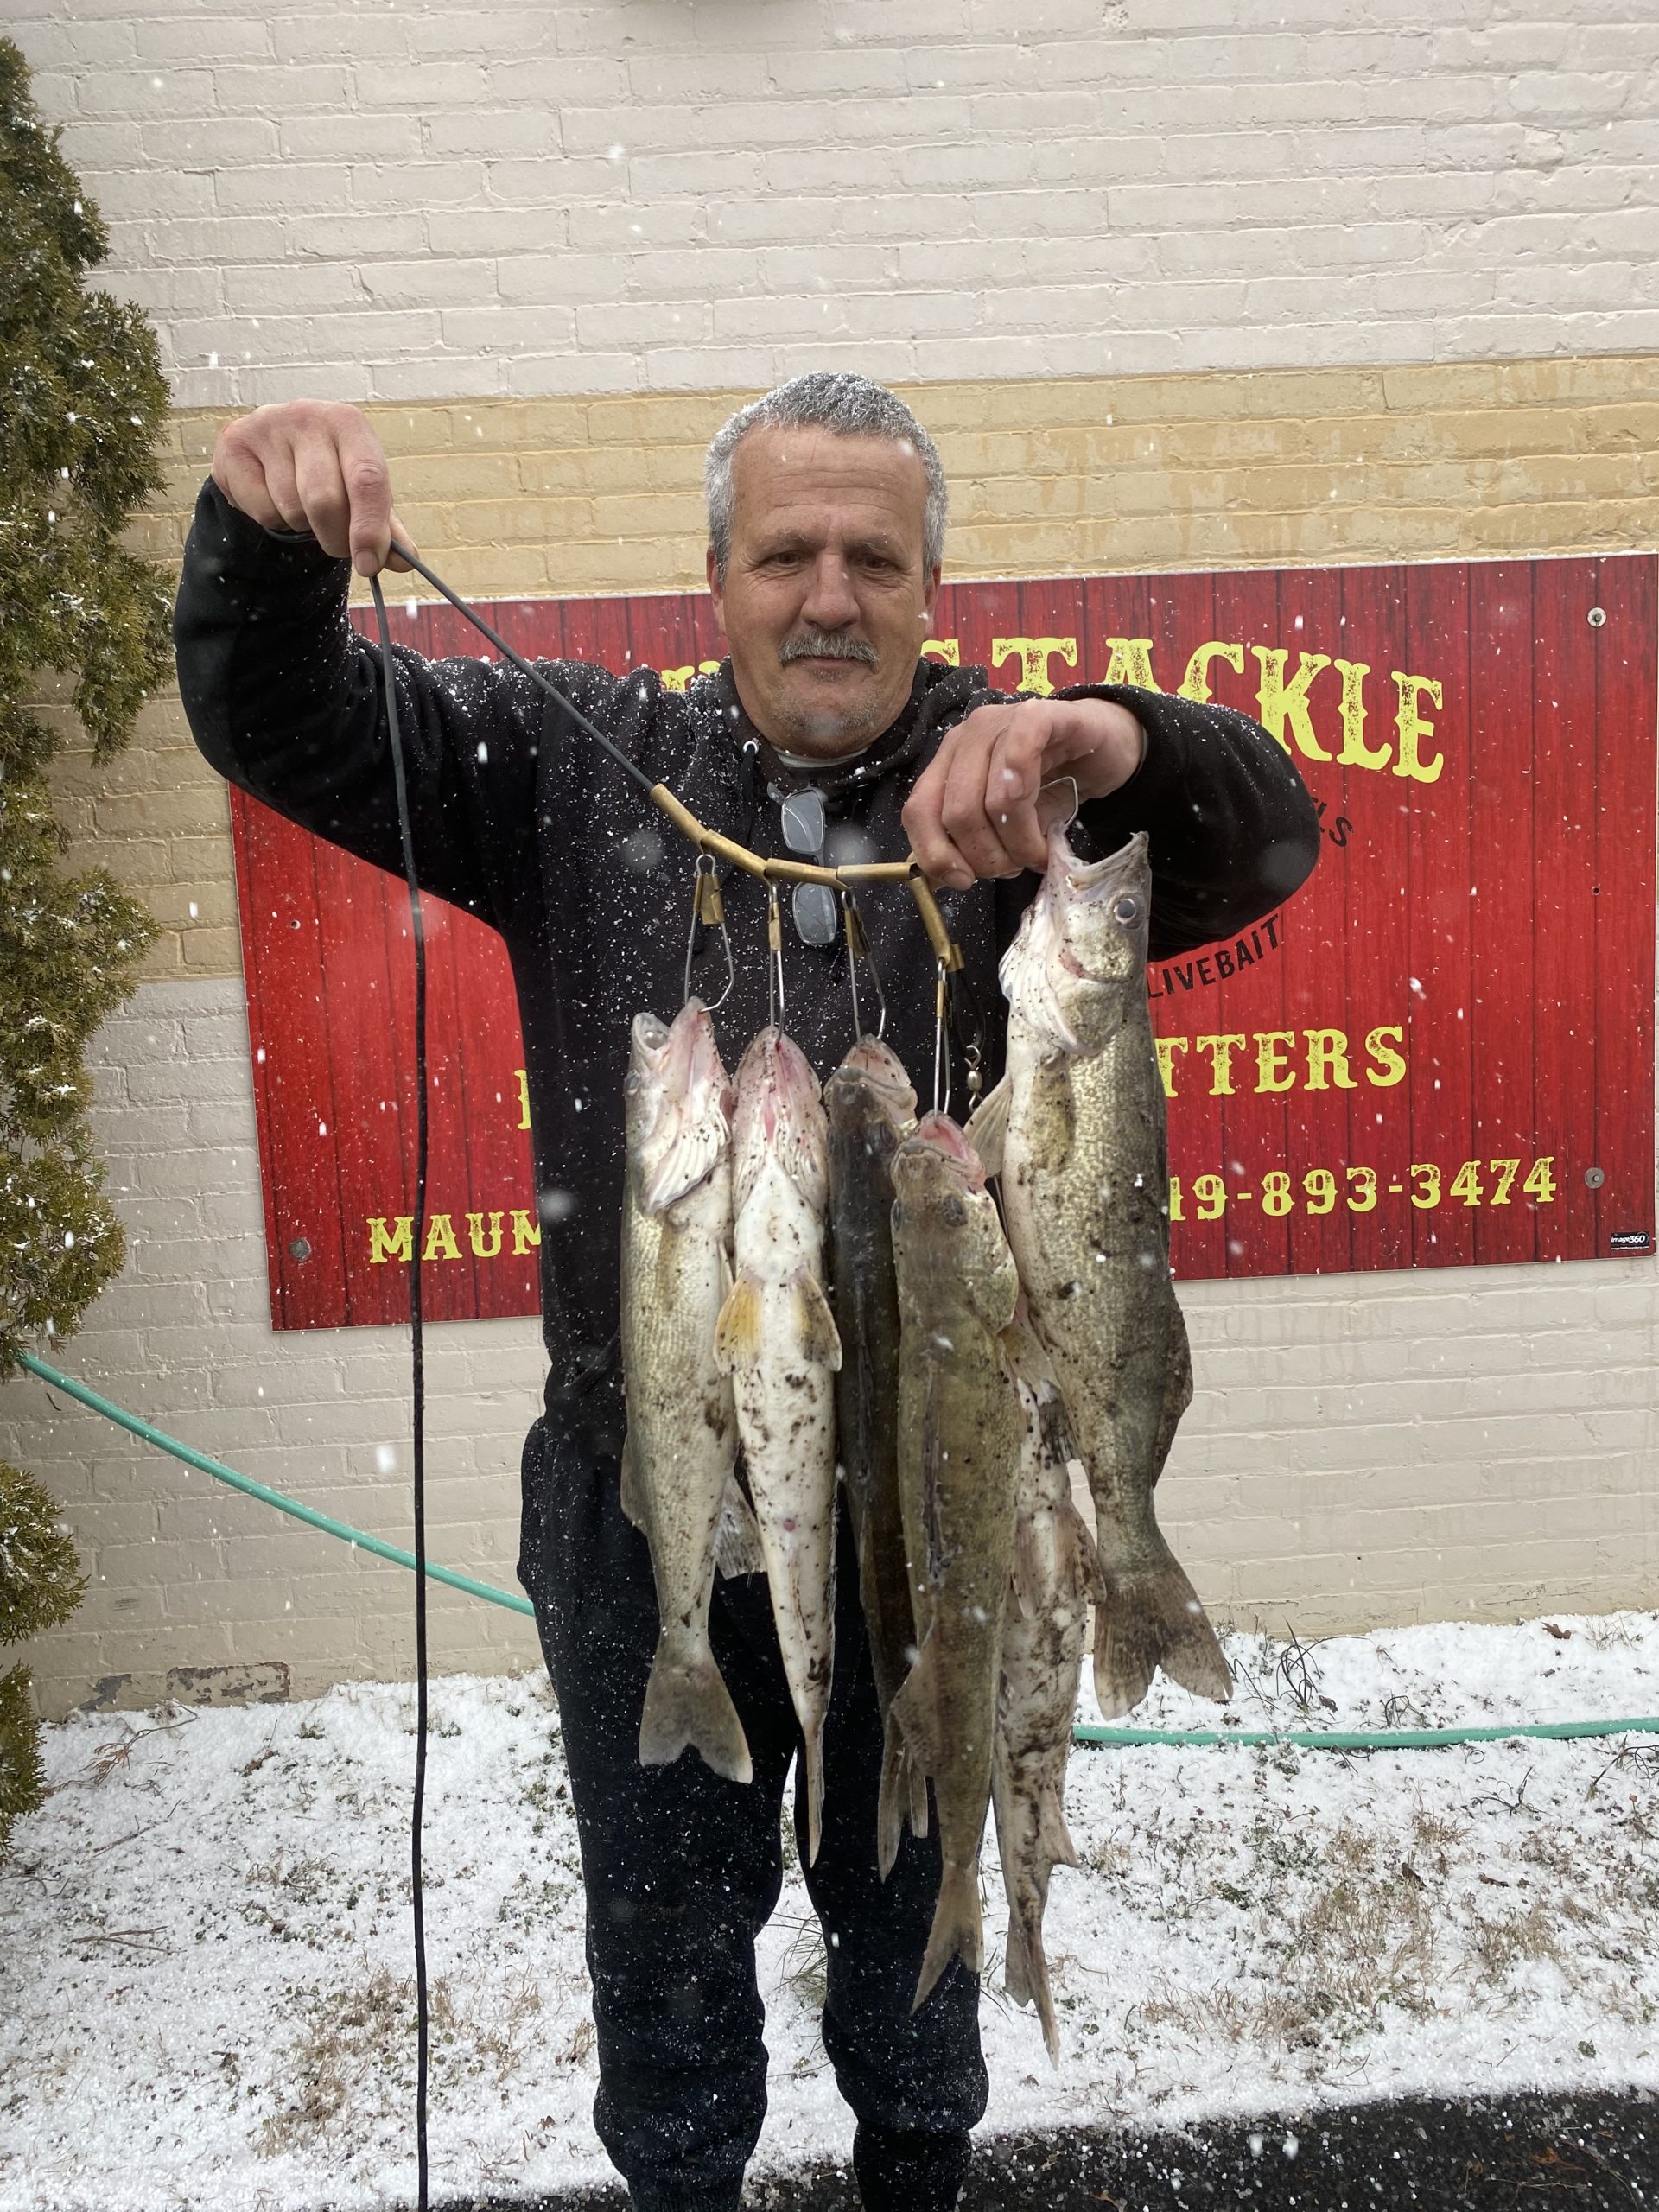 Maumee river report -14 march 23